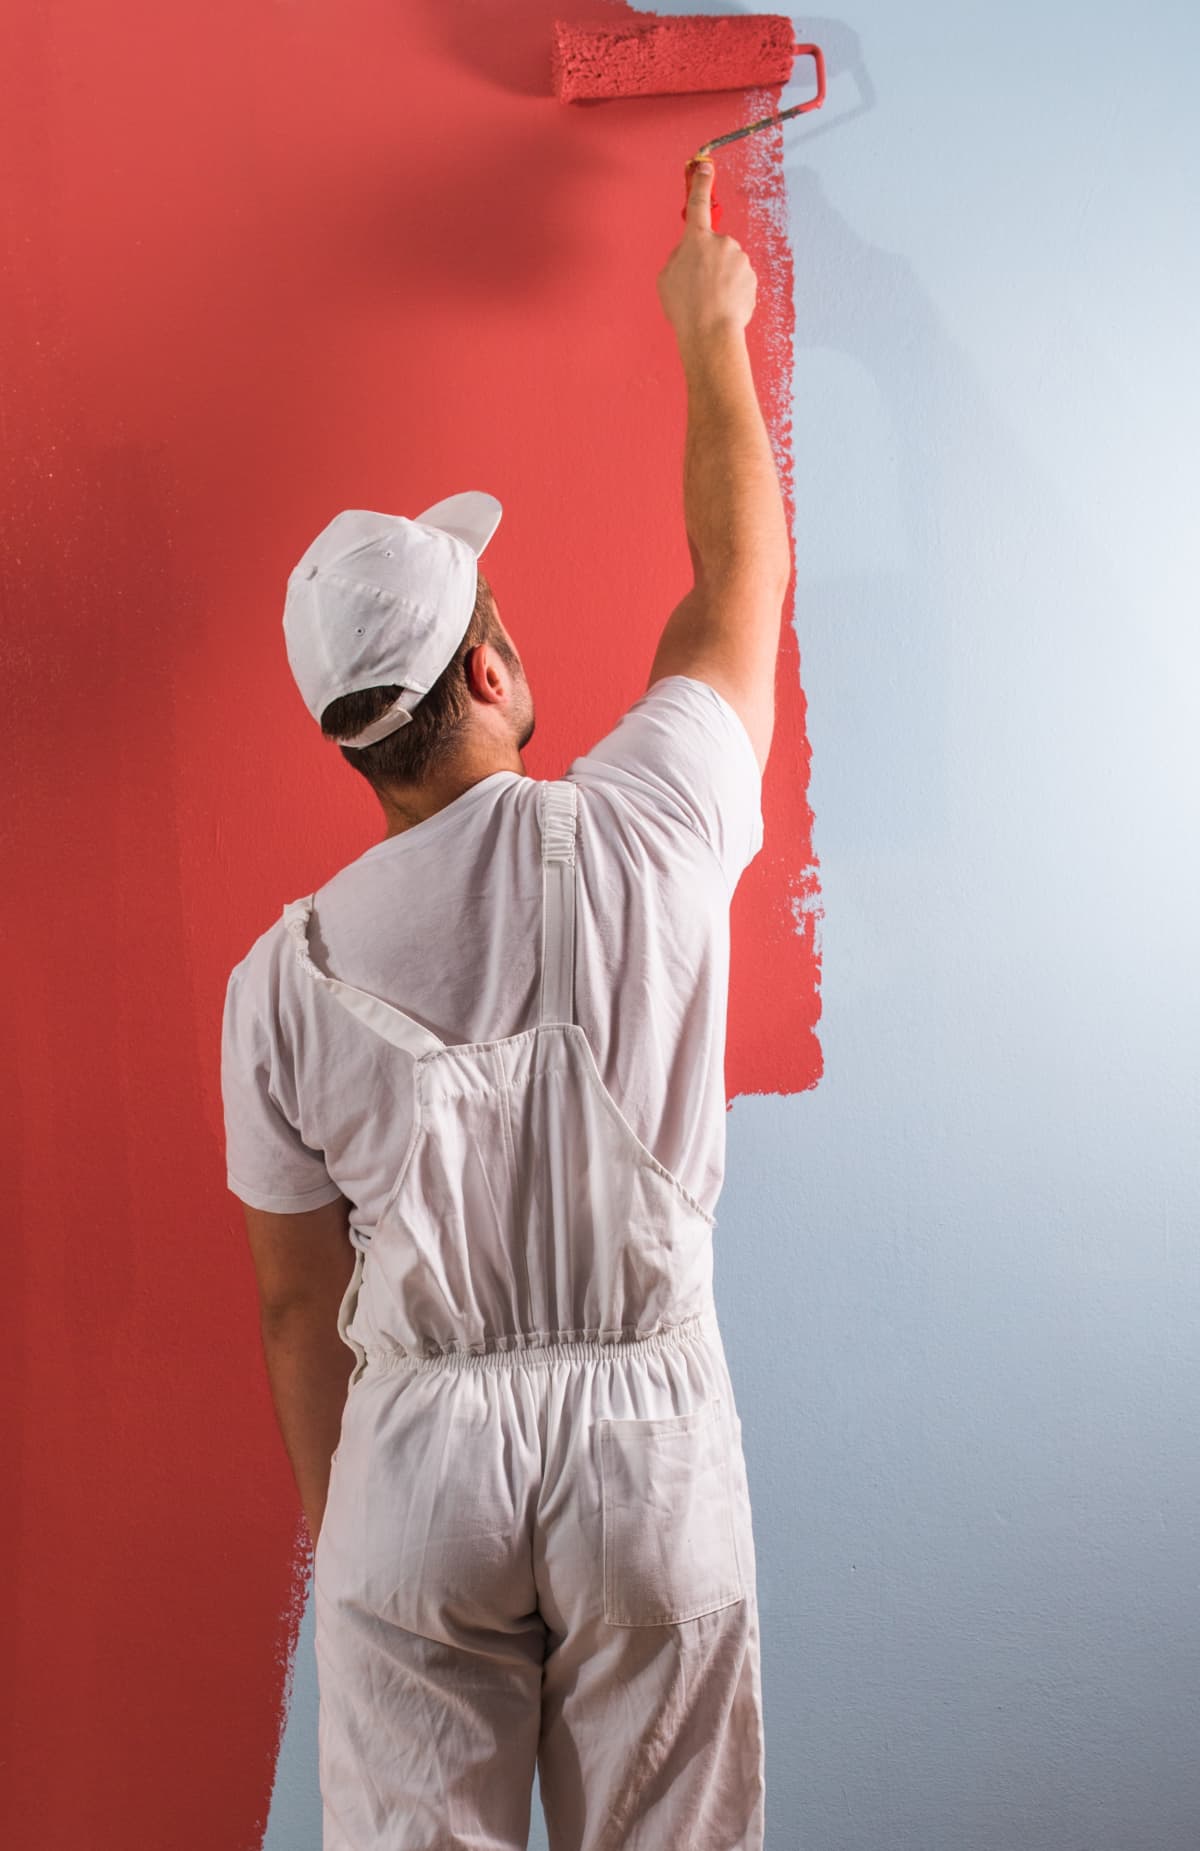 A painter using roller to paint wall red